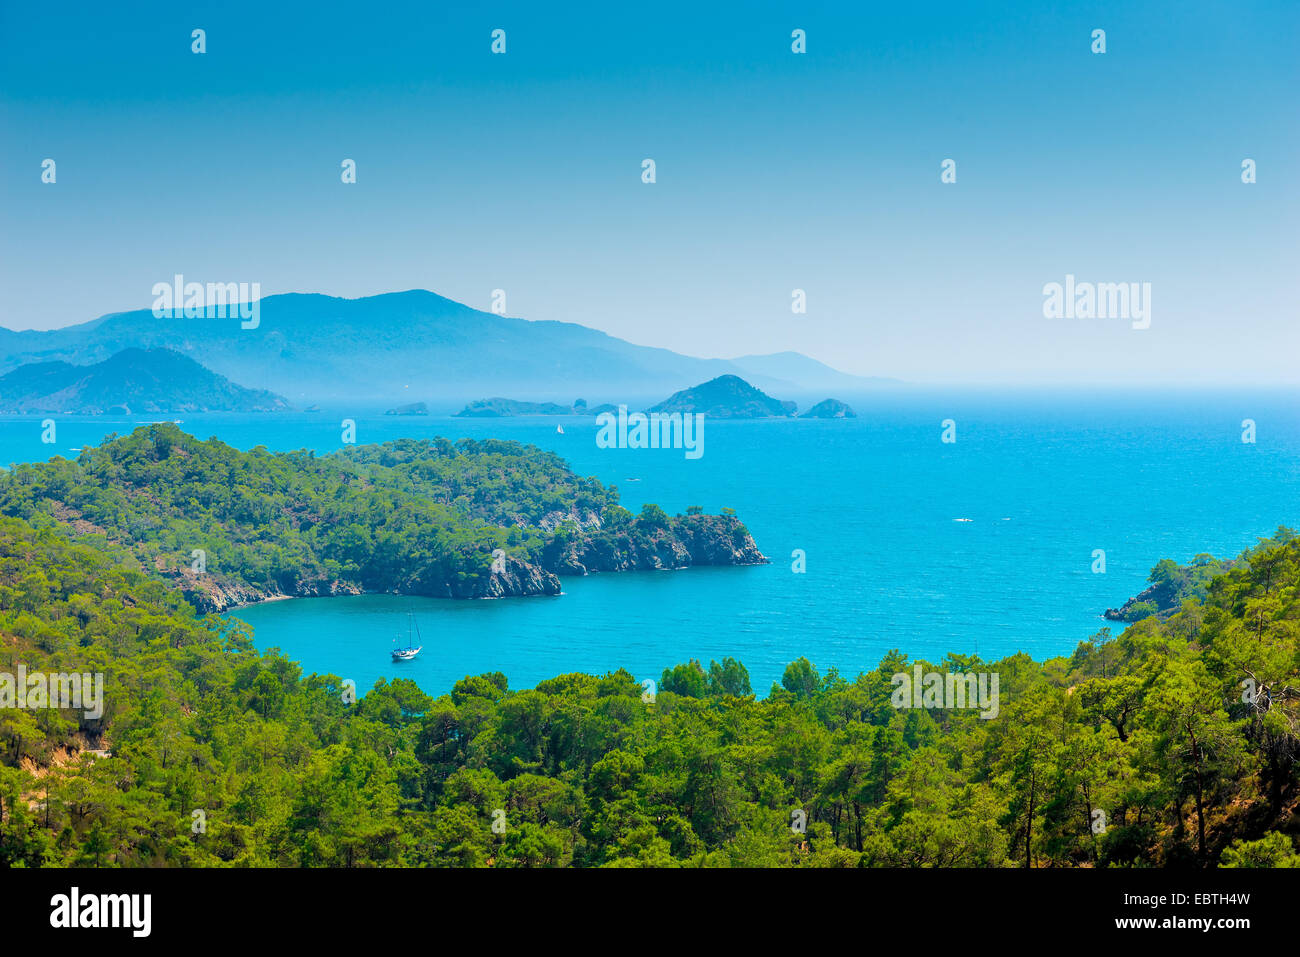 stunning seascape and pine forests on the mountains Stock Photo